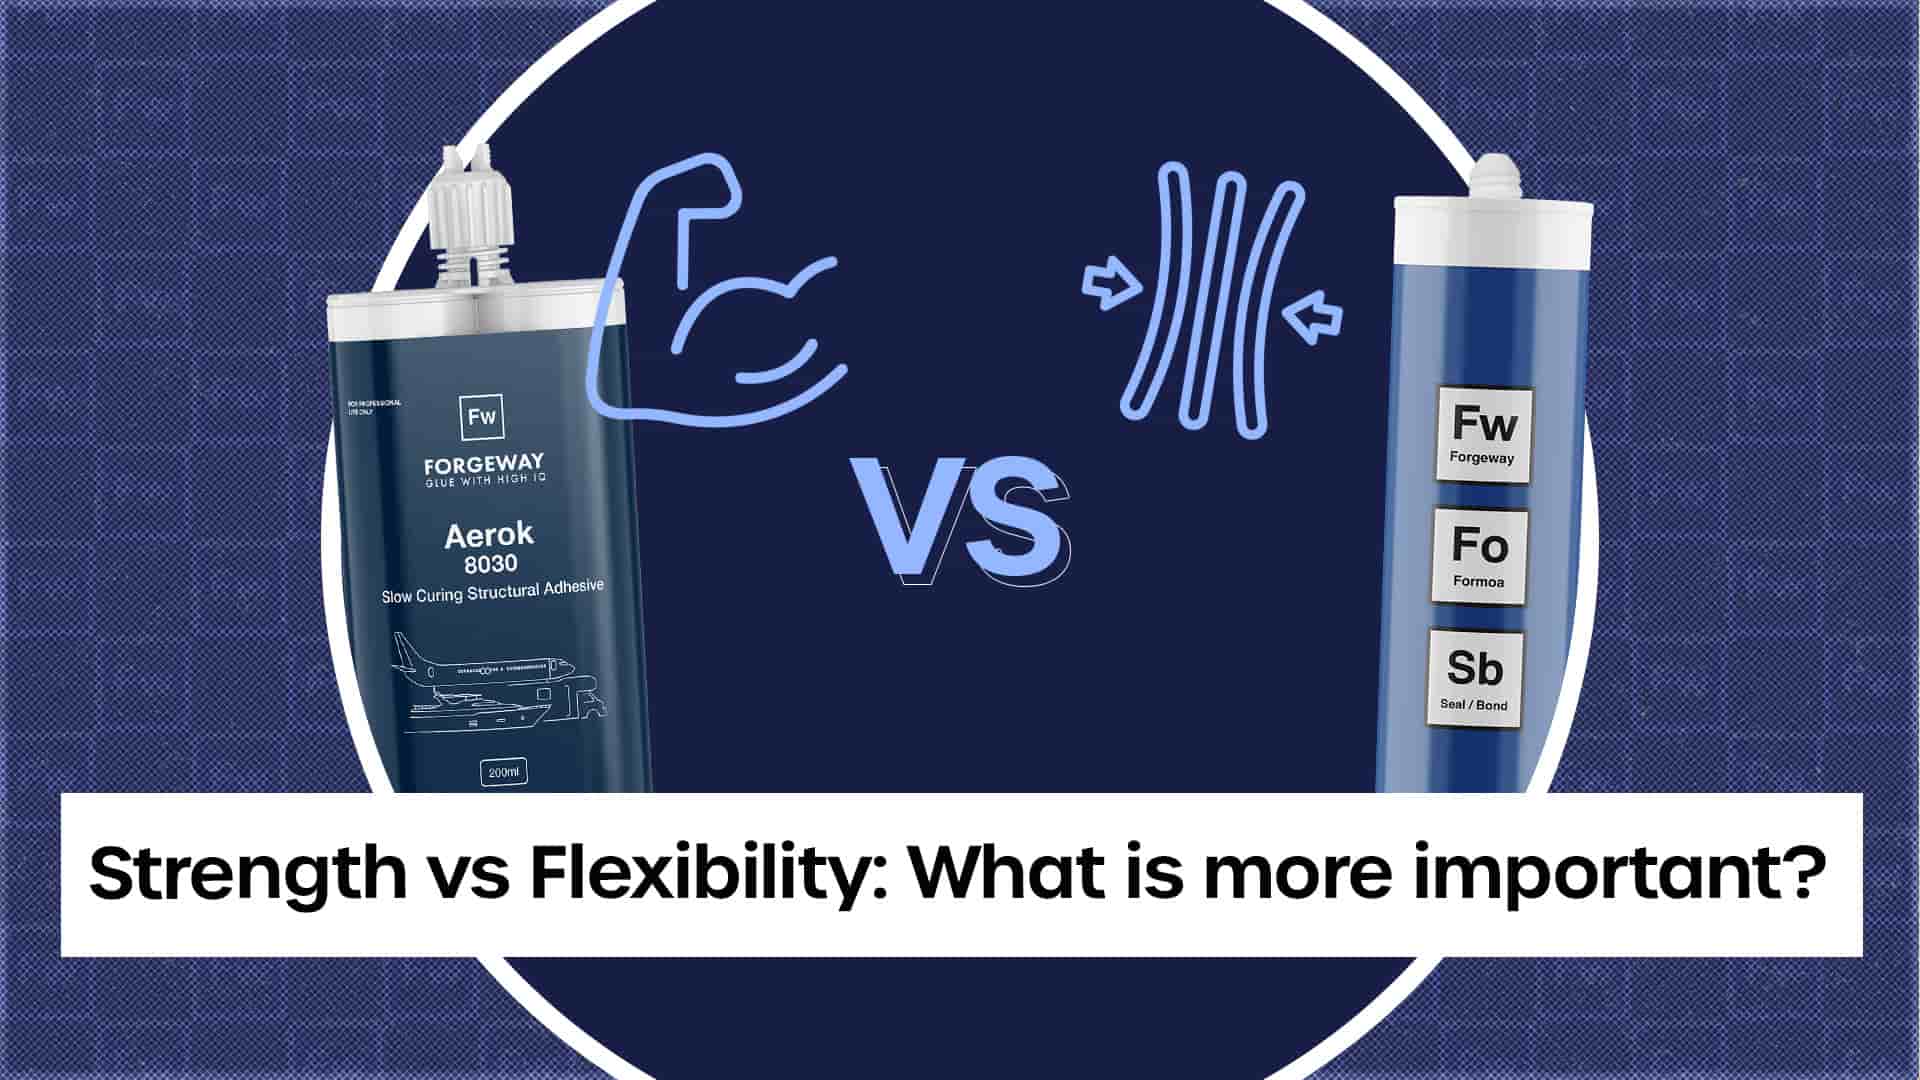 Strength v Flexibility; What is more important in an adhesive?